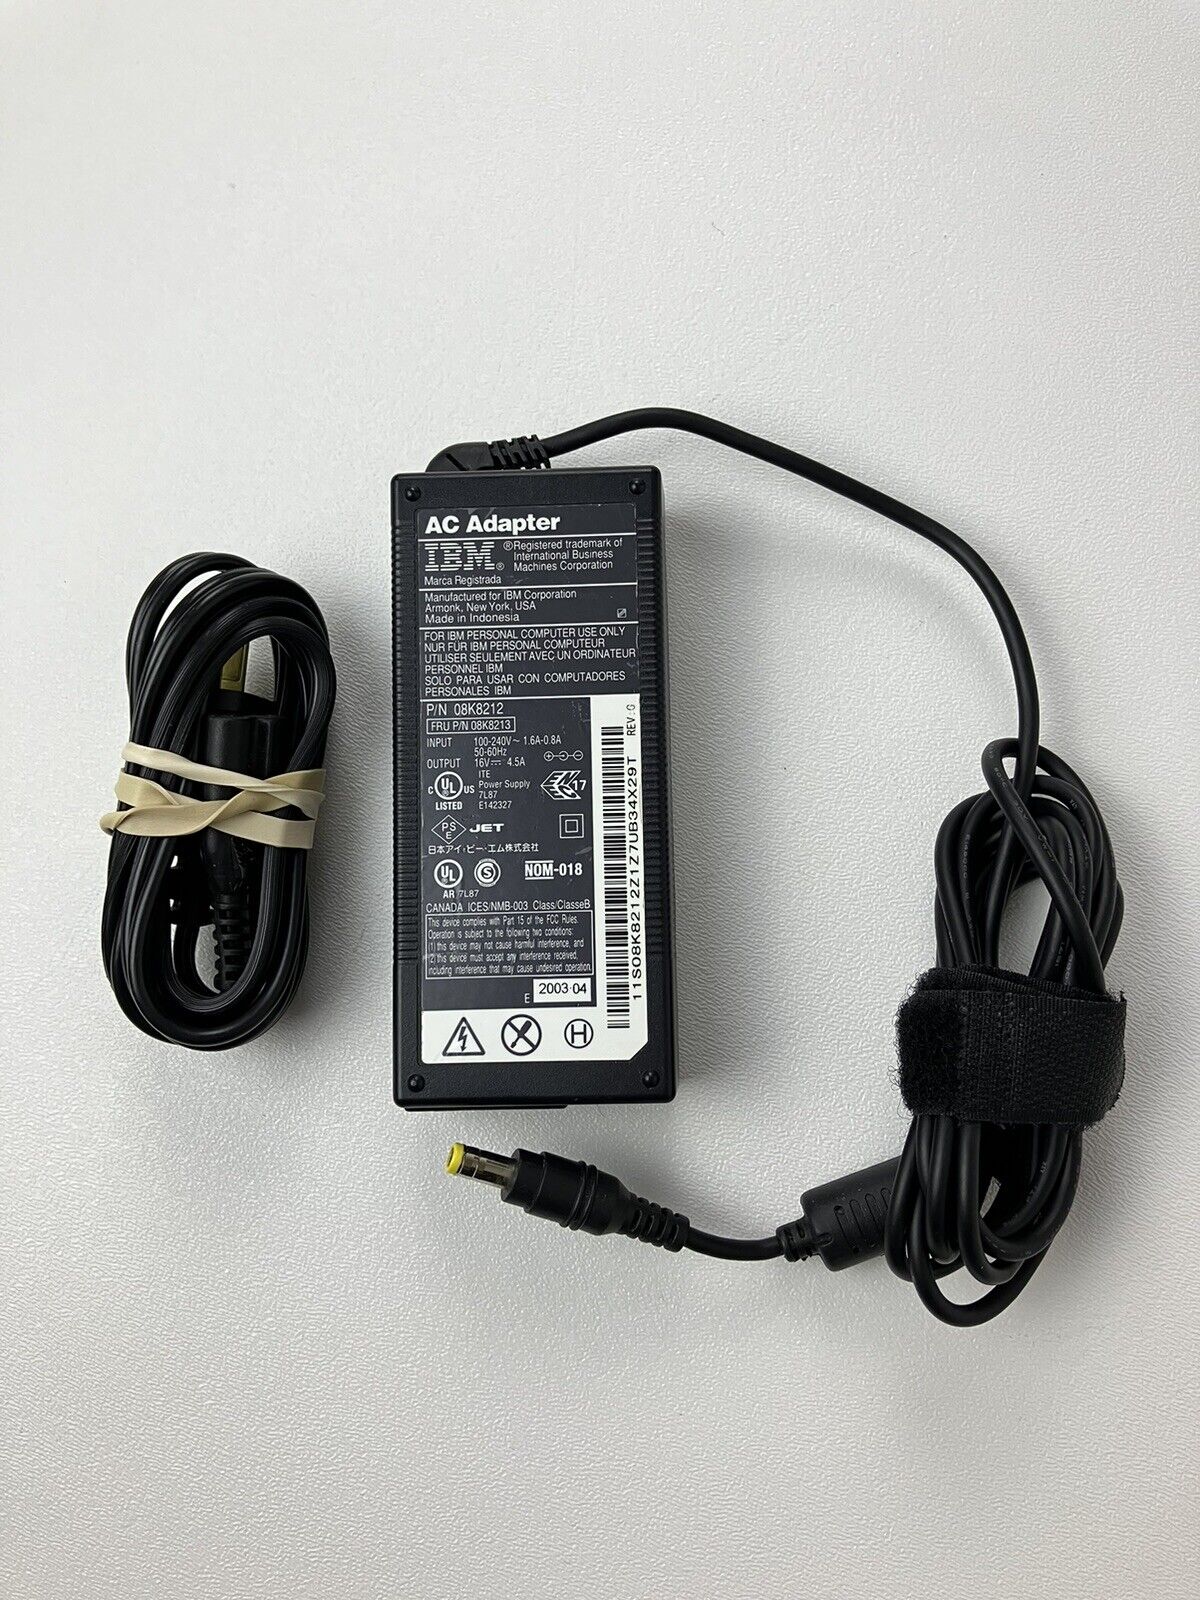 IBM AC ADAPTER P/N 08K8212 16 VOLTS TESTED WORKING ORIGINAL 